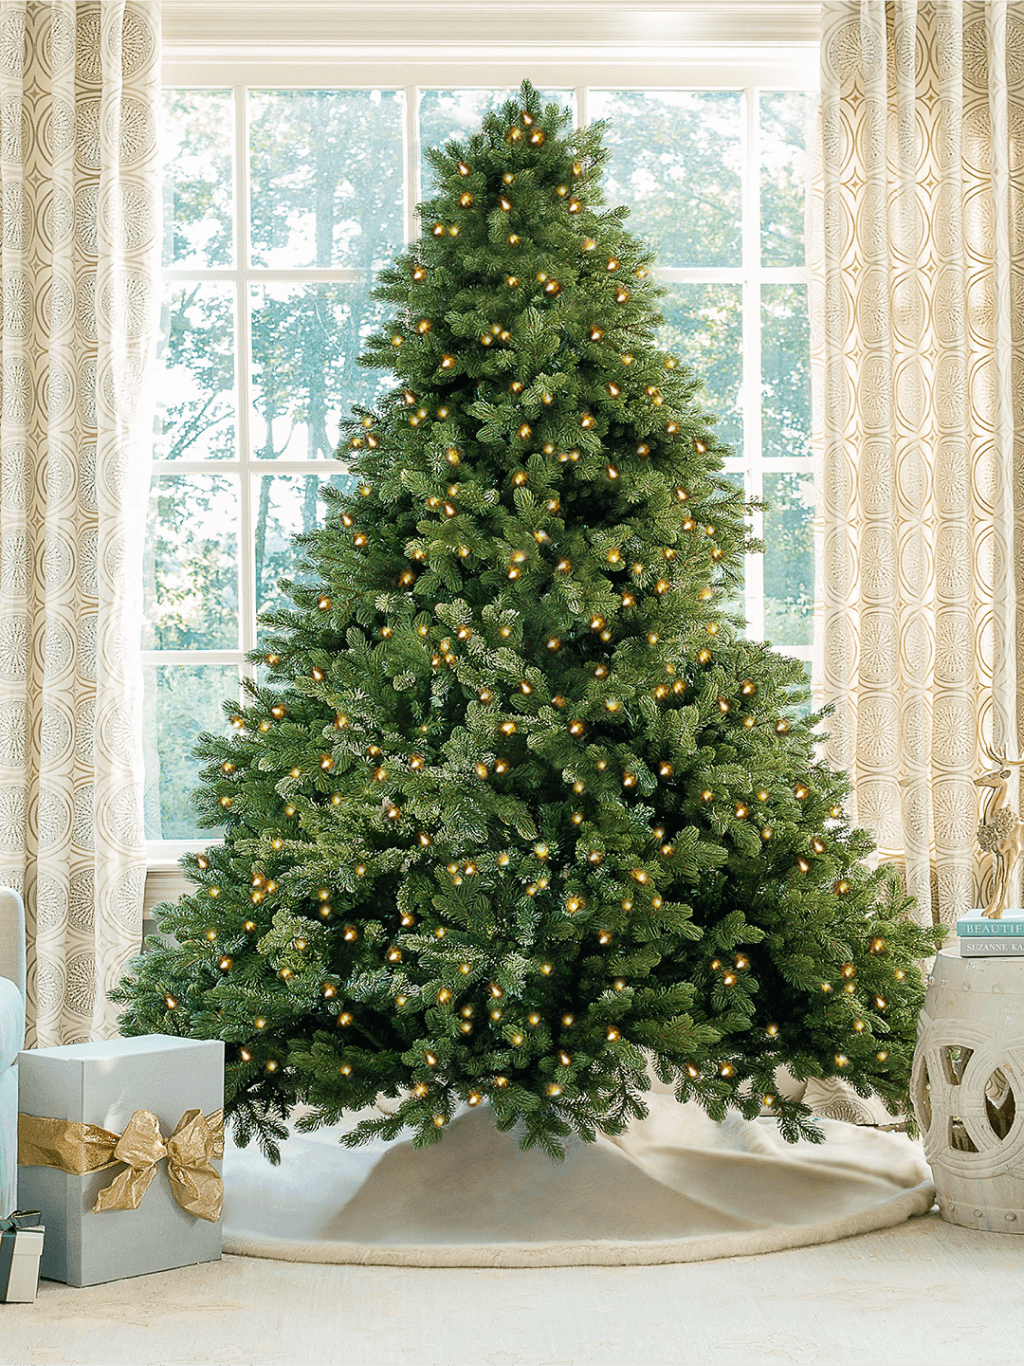 King of Christmas 7.5' Cypress Spruce Quick-Shape Artificial Christmas Tree with 1450 Warm White & Multi-Color LED Lights